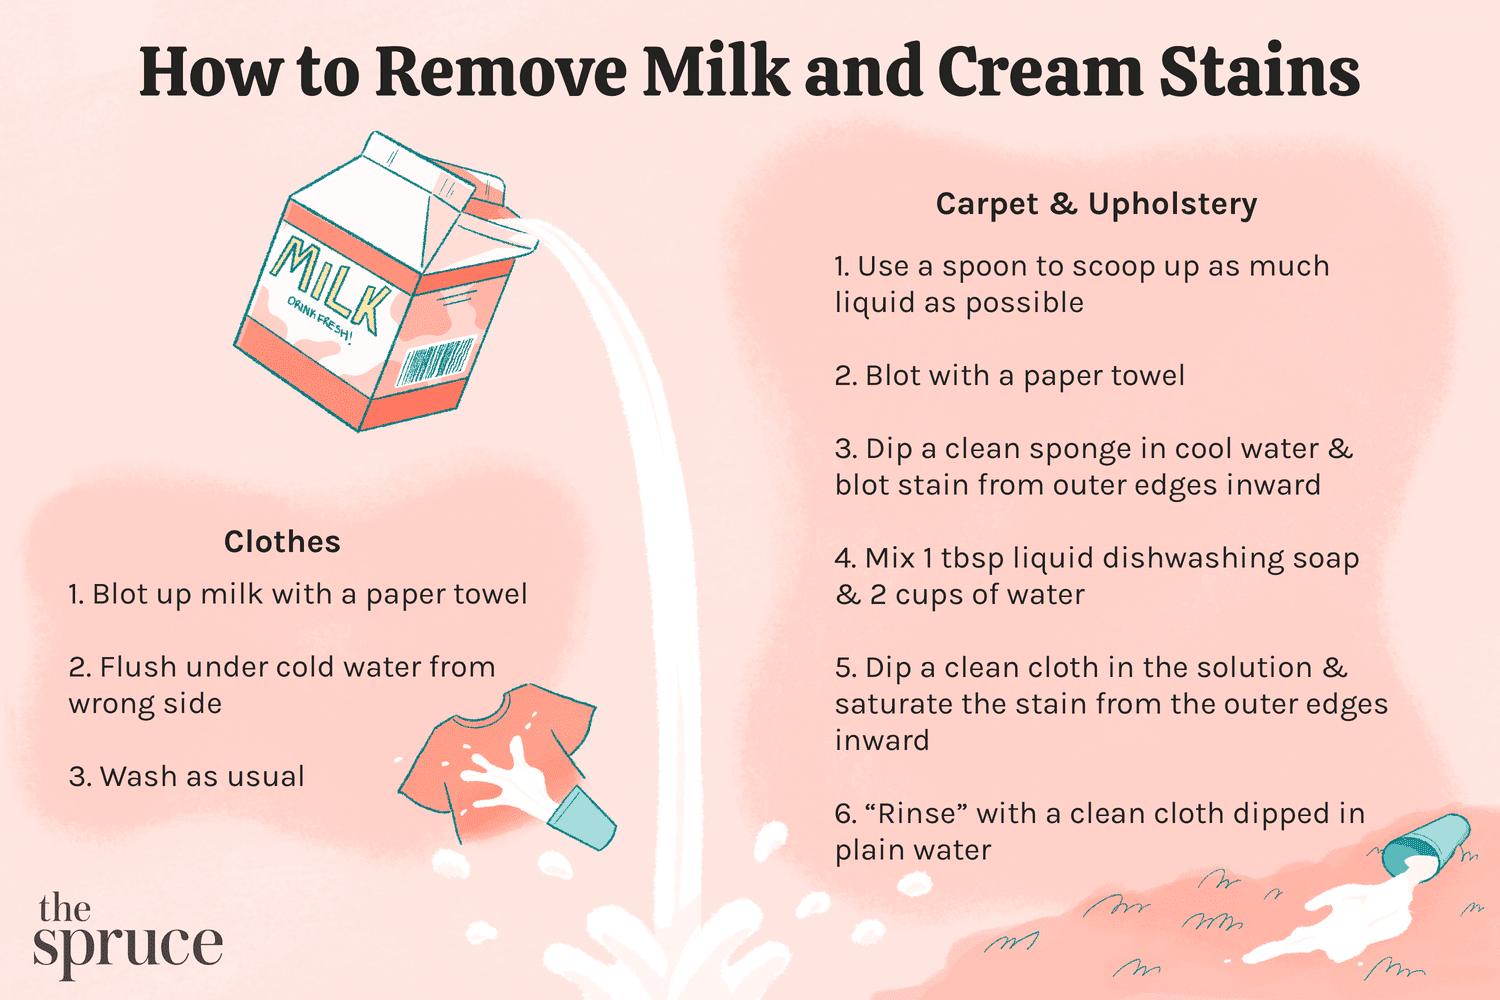 Step 1: Blot And Remove Excess Milk